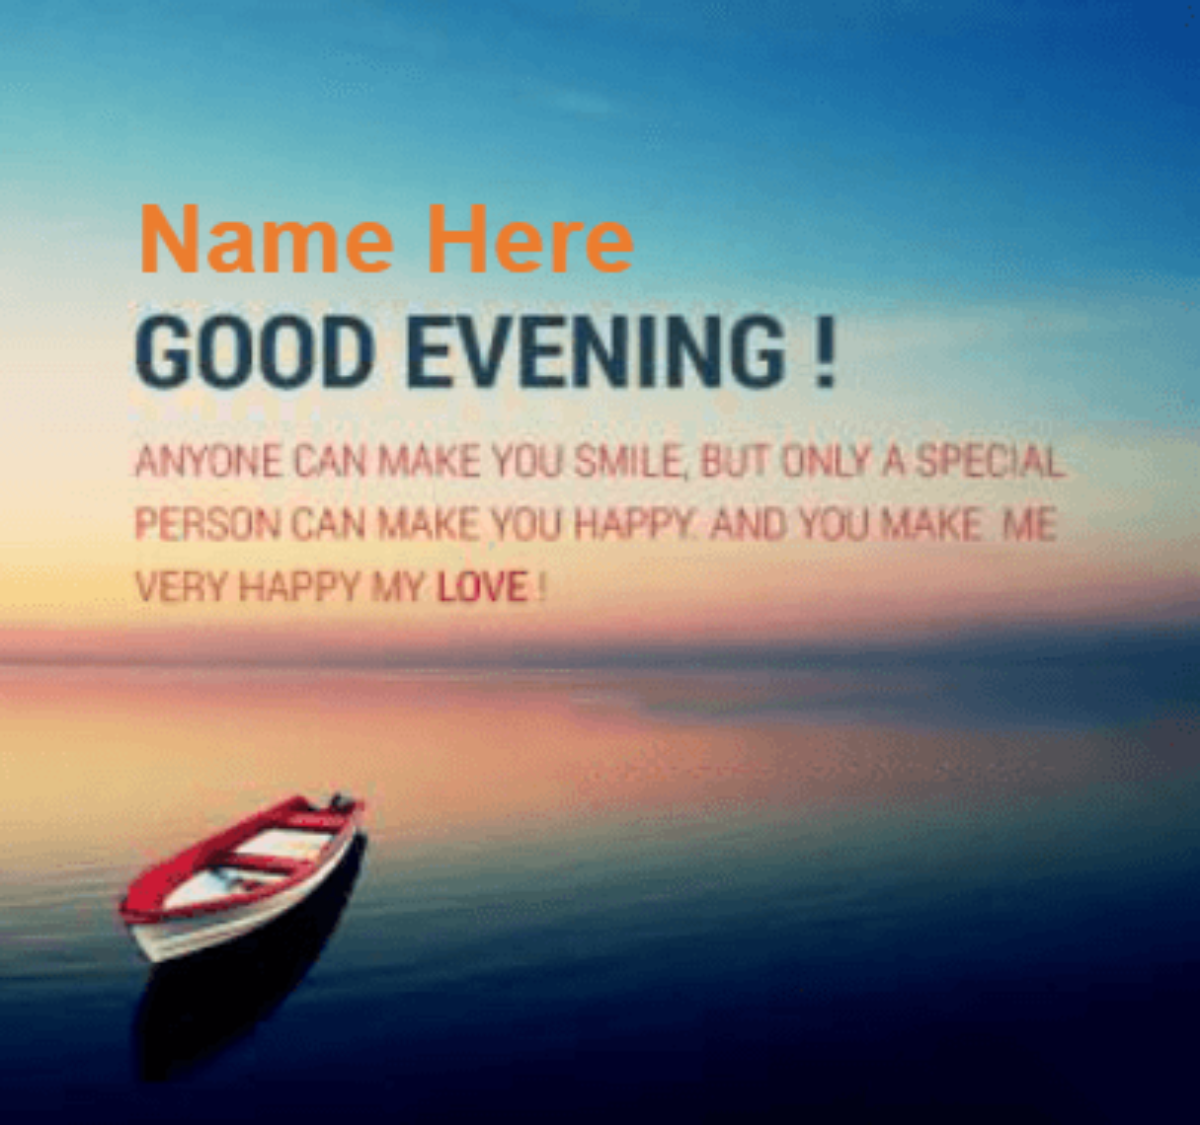 Great Evening Quotes Card - Good Evening Images with Name